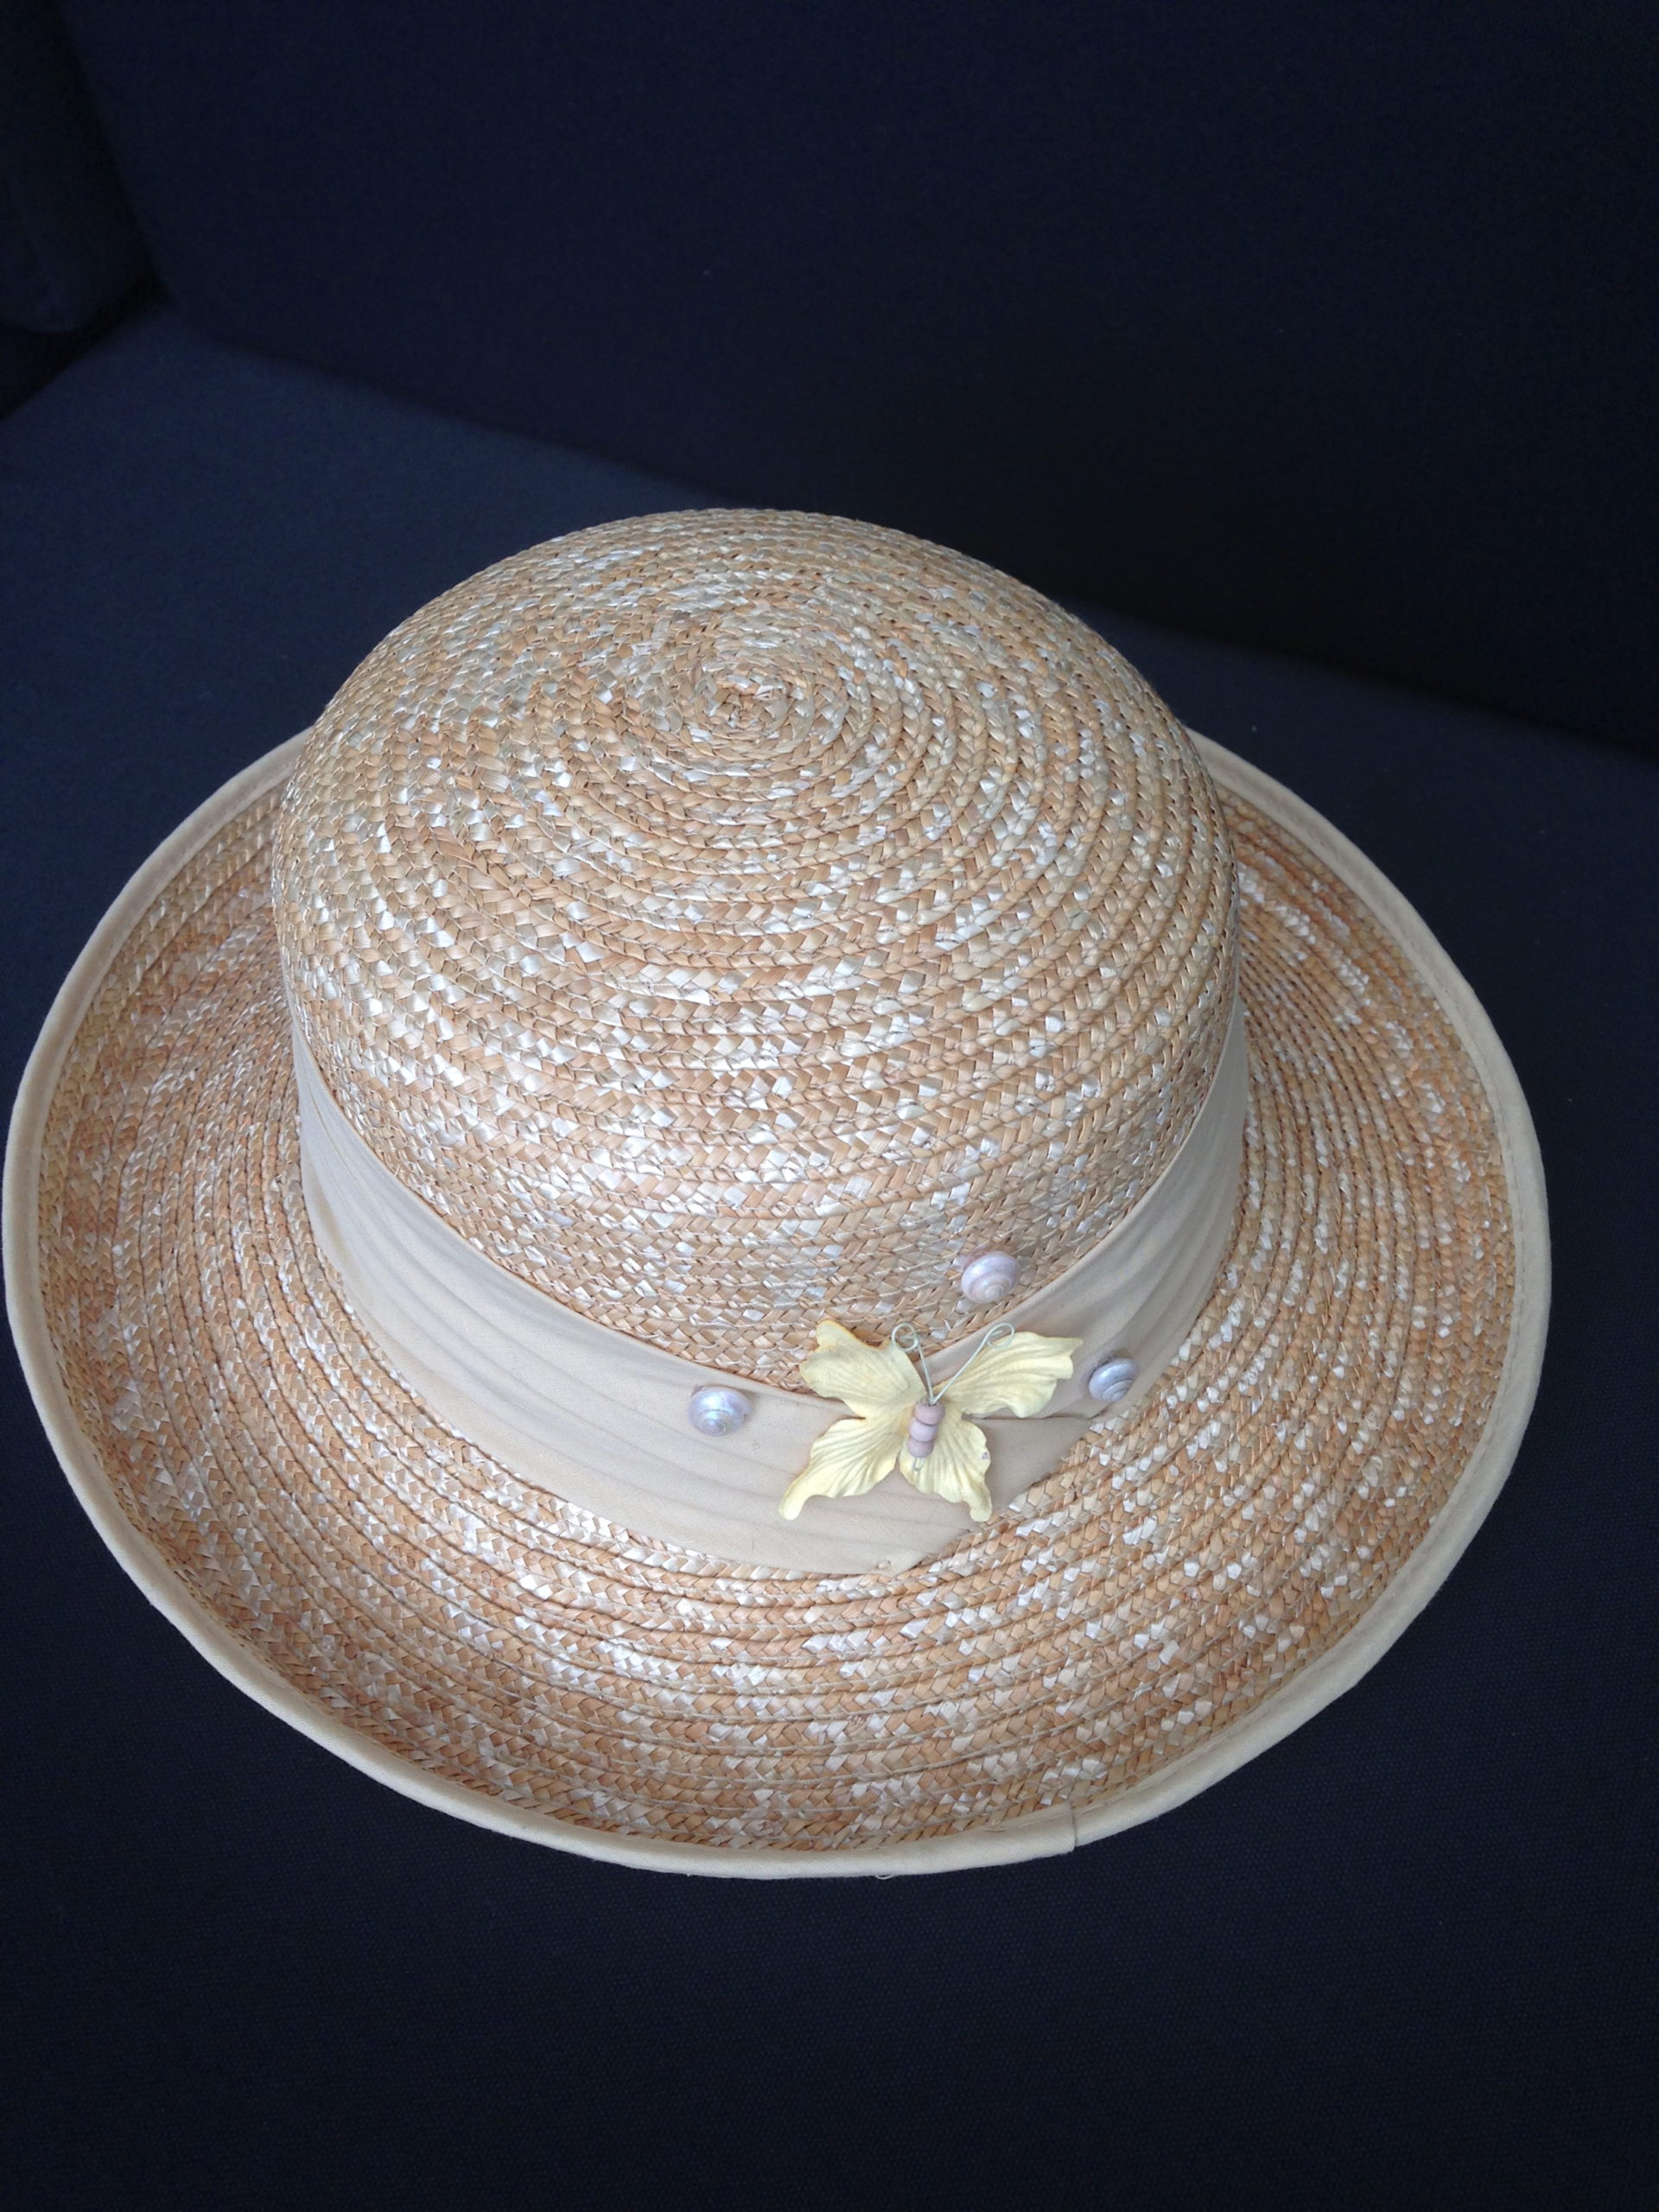 Raphia hat shells and butterfly